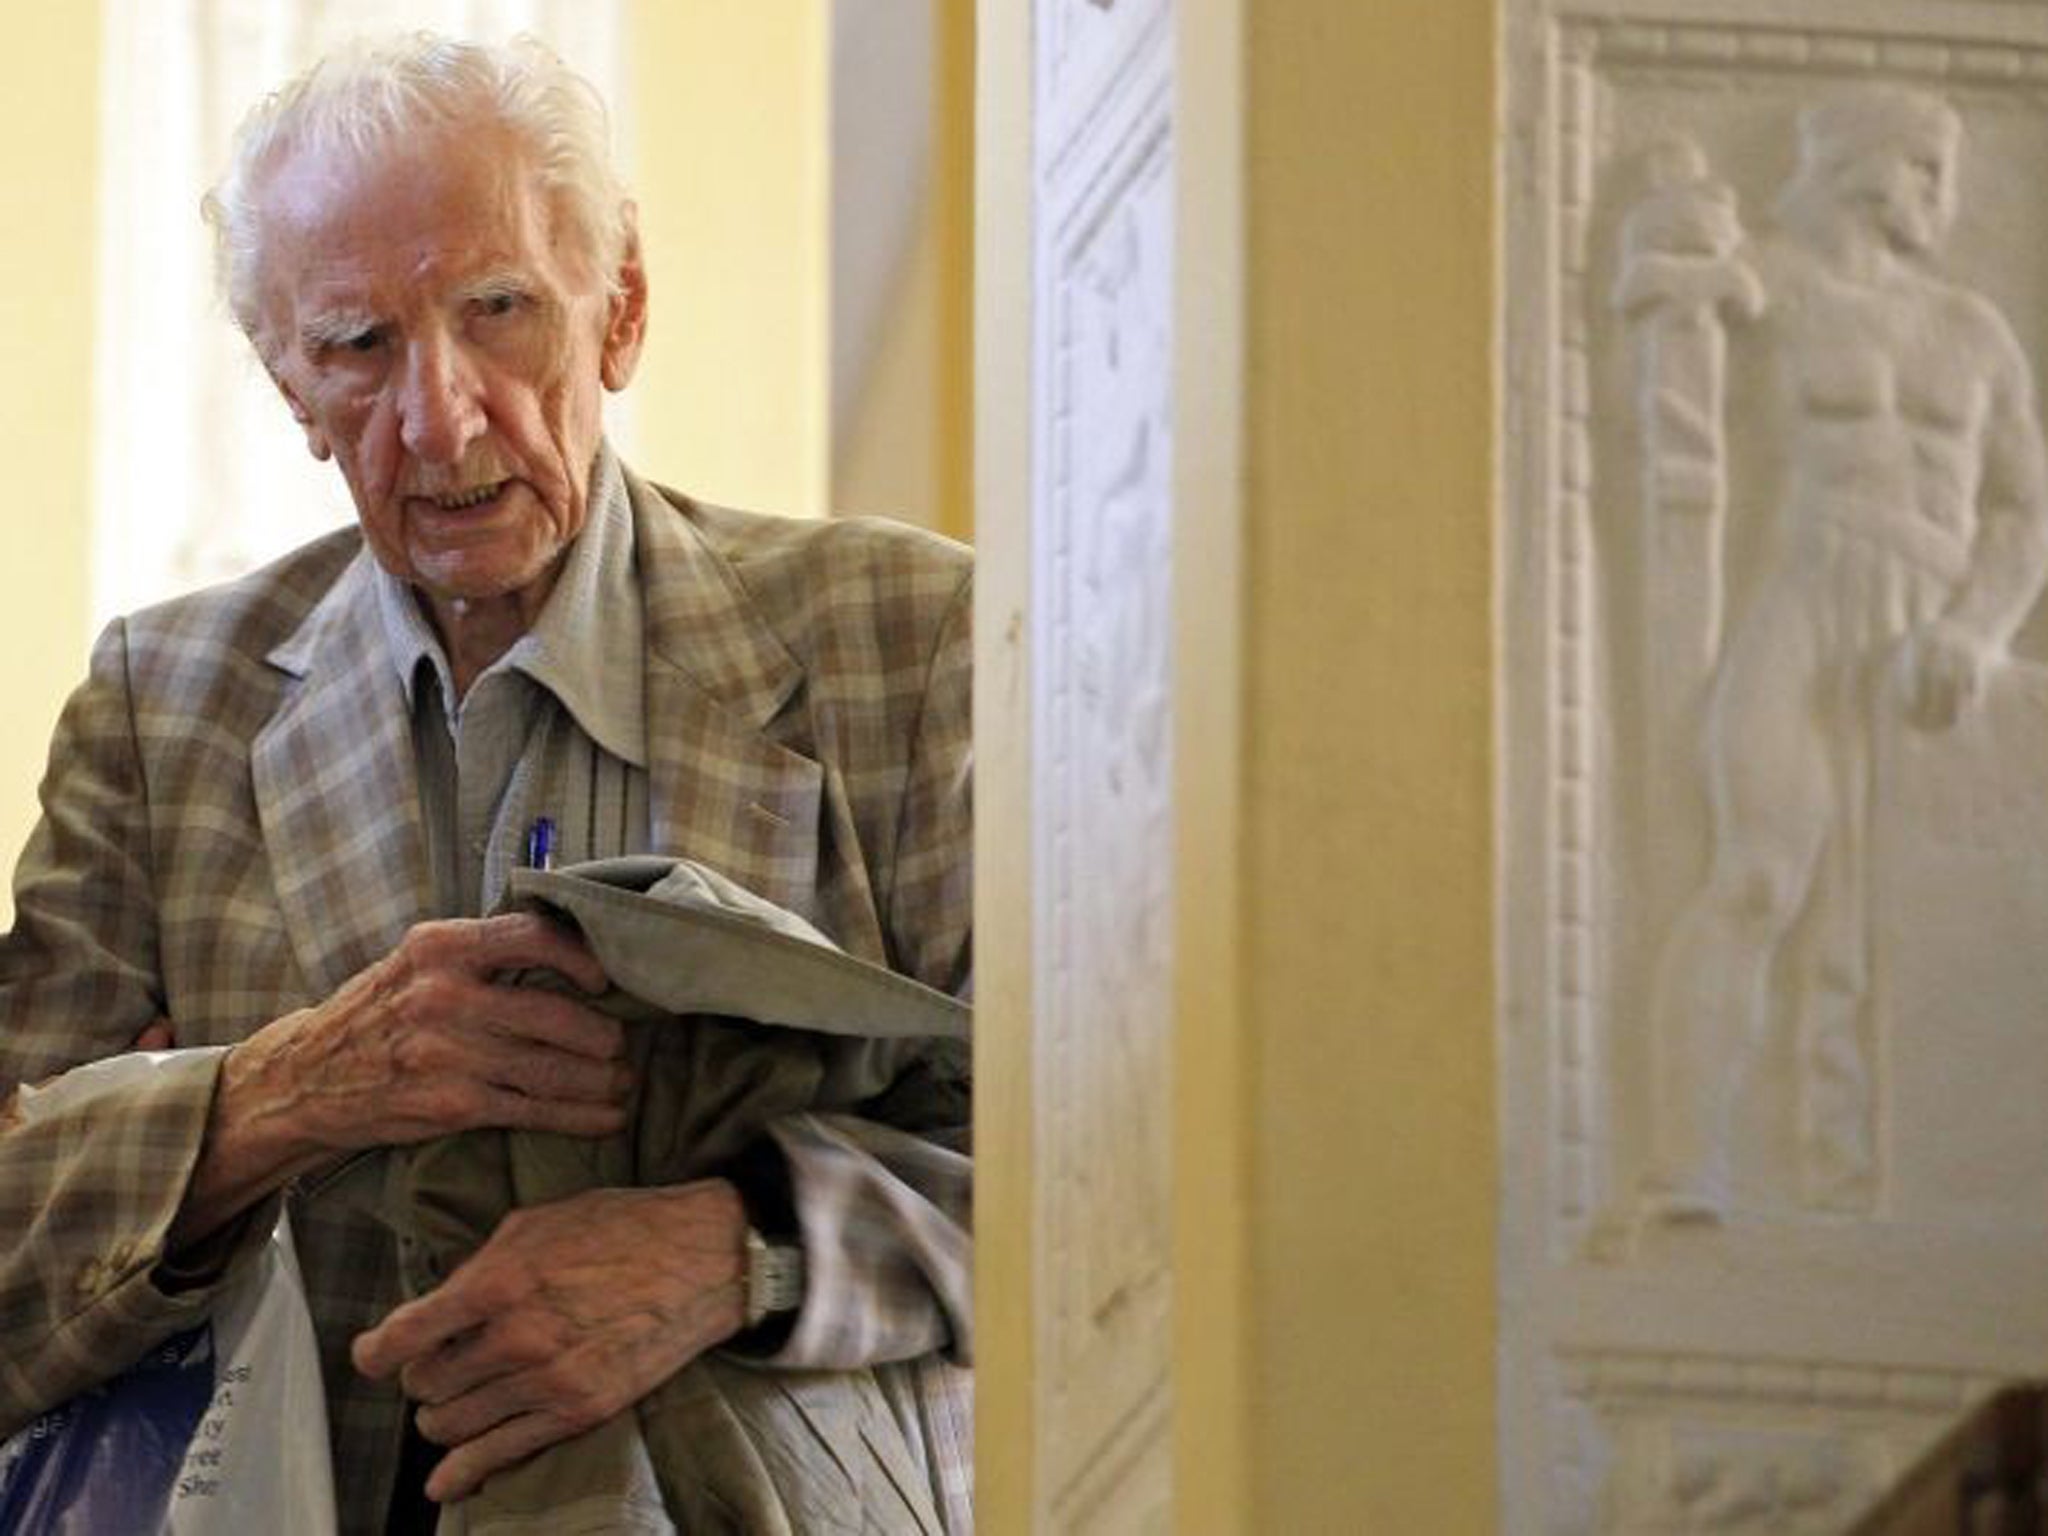 98-year-old Laszlo Csatary is accused of assisting in the murder of 15,700 Jews during Second World War